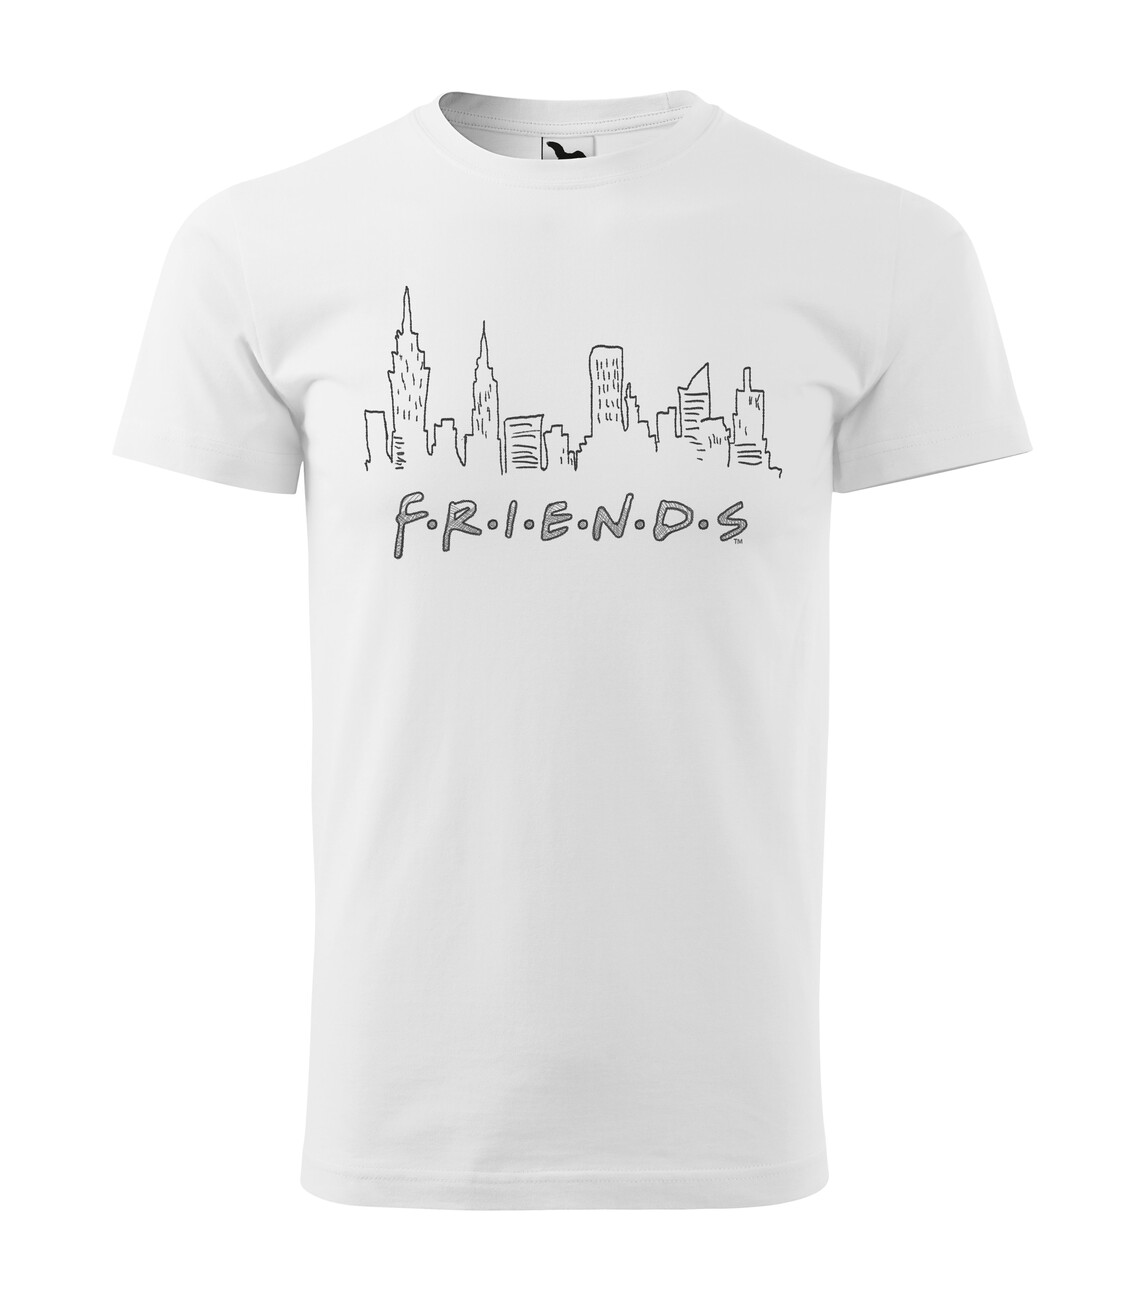 Friends - Logo | Clothes and accessories for merchandise fans